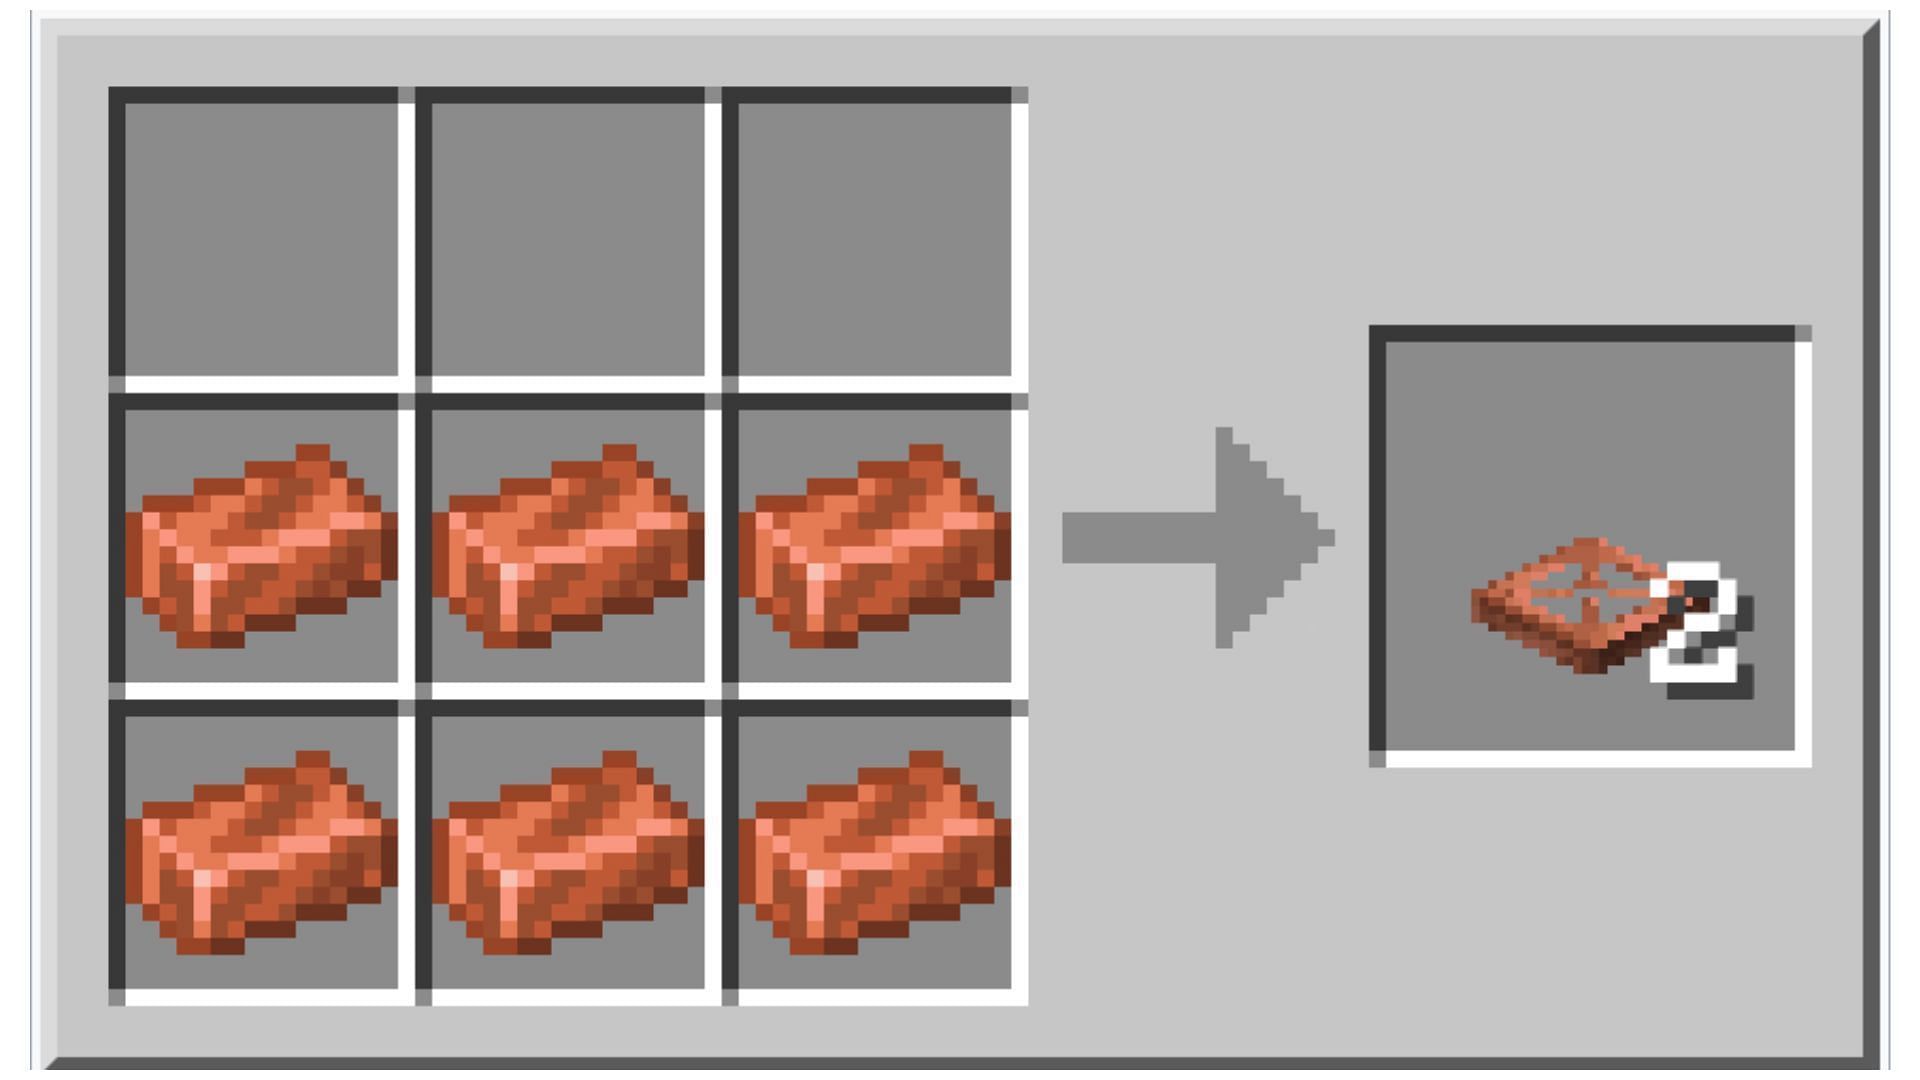 The updated and cheaper recipe for making copper trapdoors. (Image via Mojang Studios)